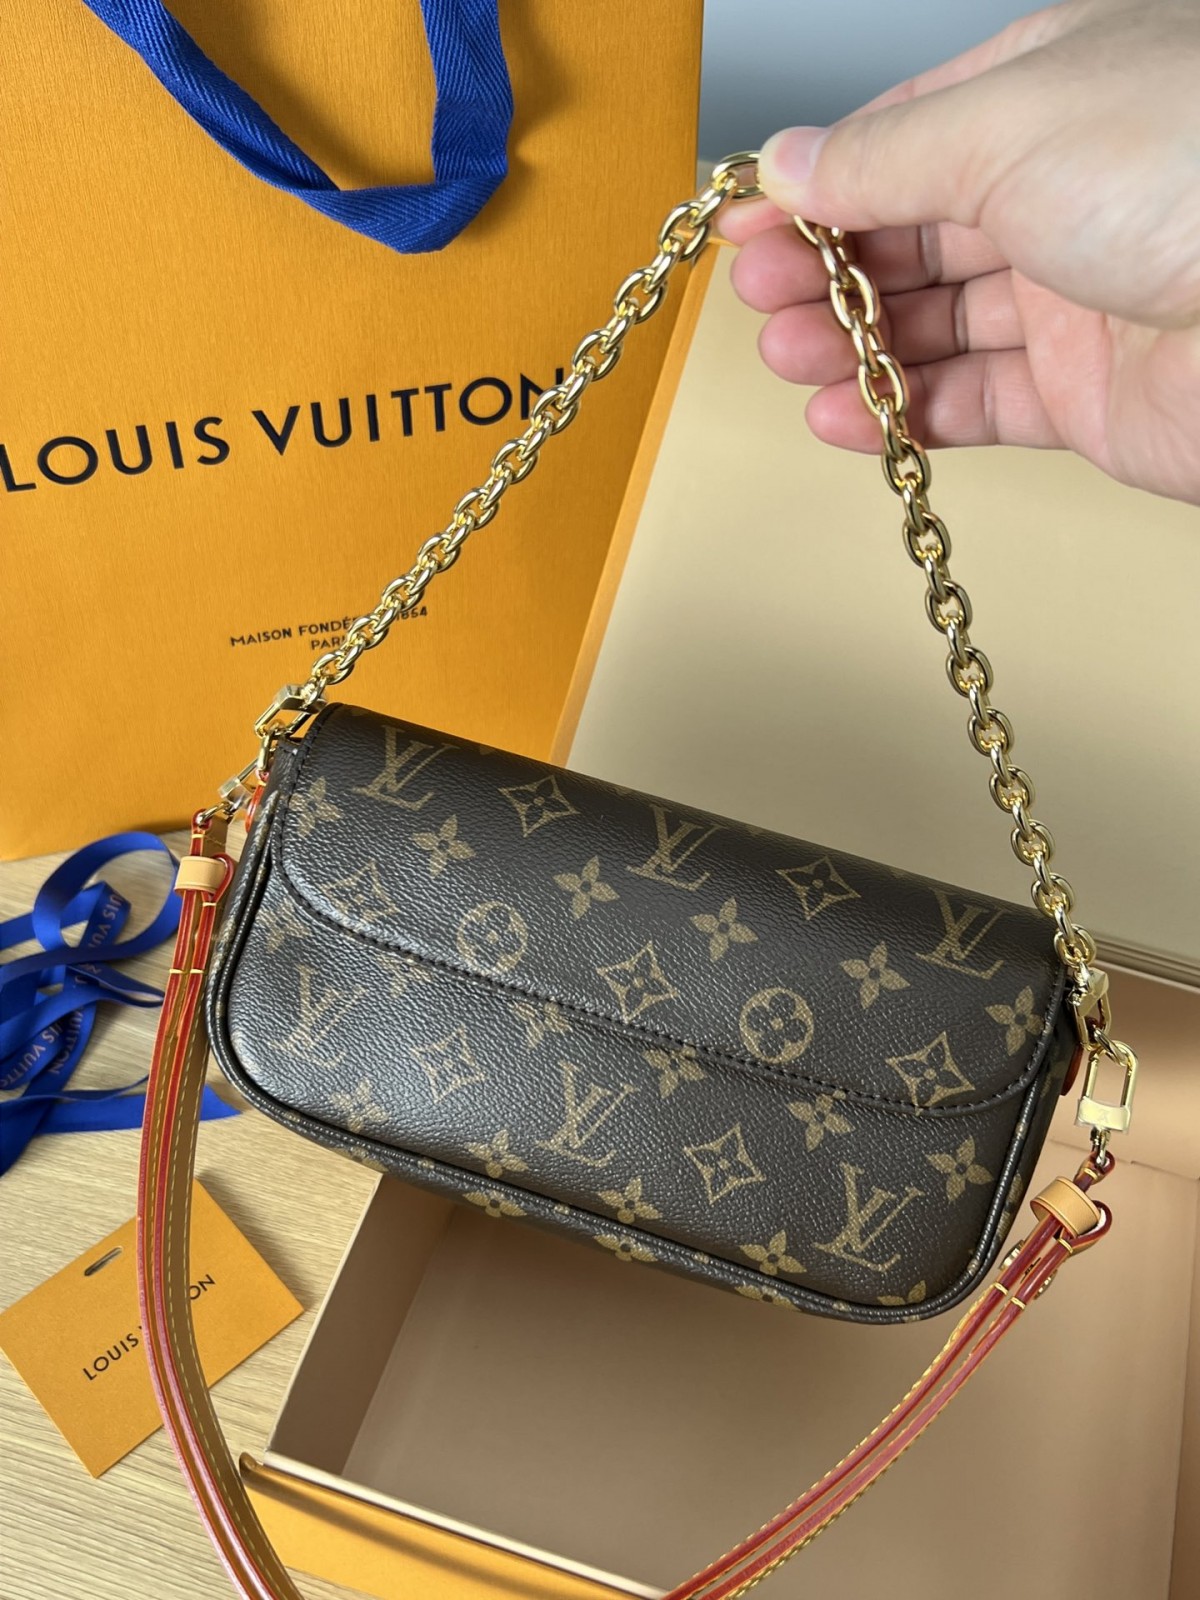 How good quality is a M81911 LOUIS VUITTON WALLET ON CHAIN IVY（2023 new edition）-بهترين معيار جي جعلي لوئس ويٽون بيگ آن لائين اسٽور، ريپليڪا ڊيزائنر بيگ ru